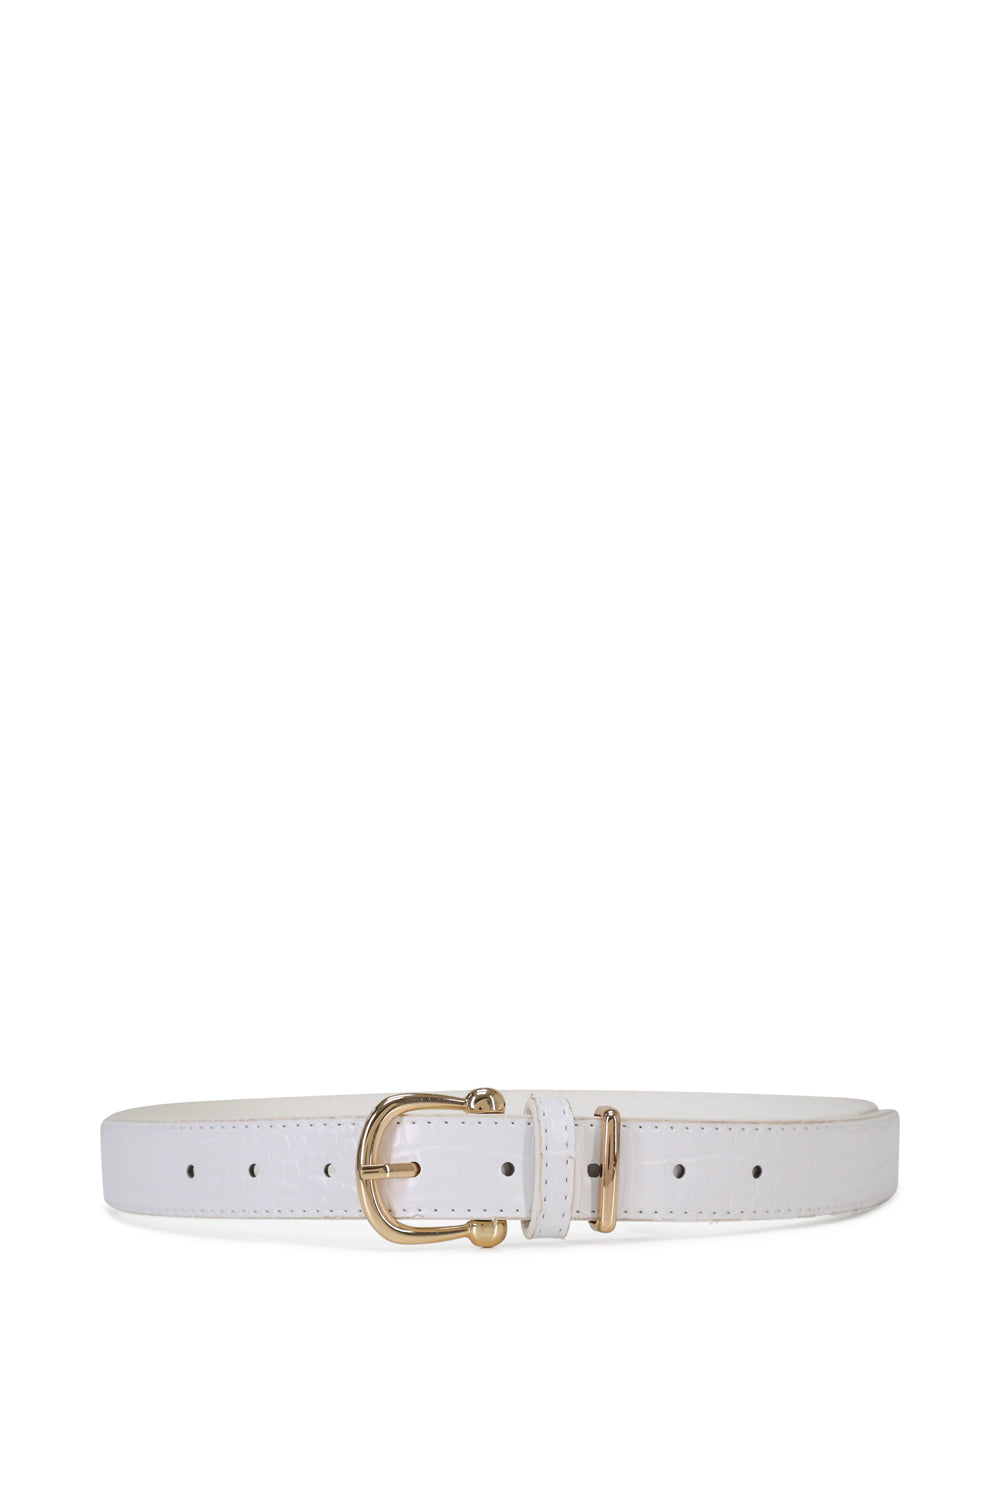 My Accessories London Minimal Croc Belt in White | Animal Print | Festival | Going out | Glam | Layering | Women's | Women's Accessories